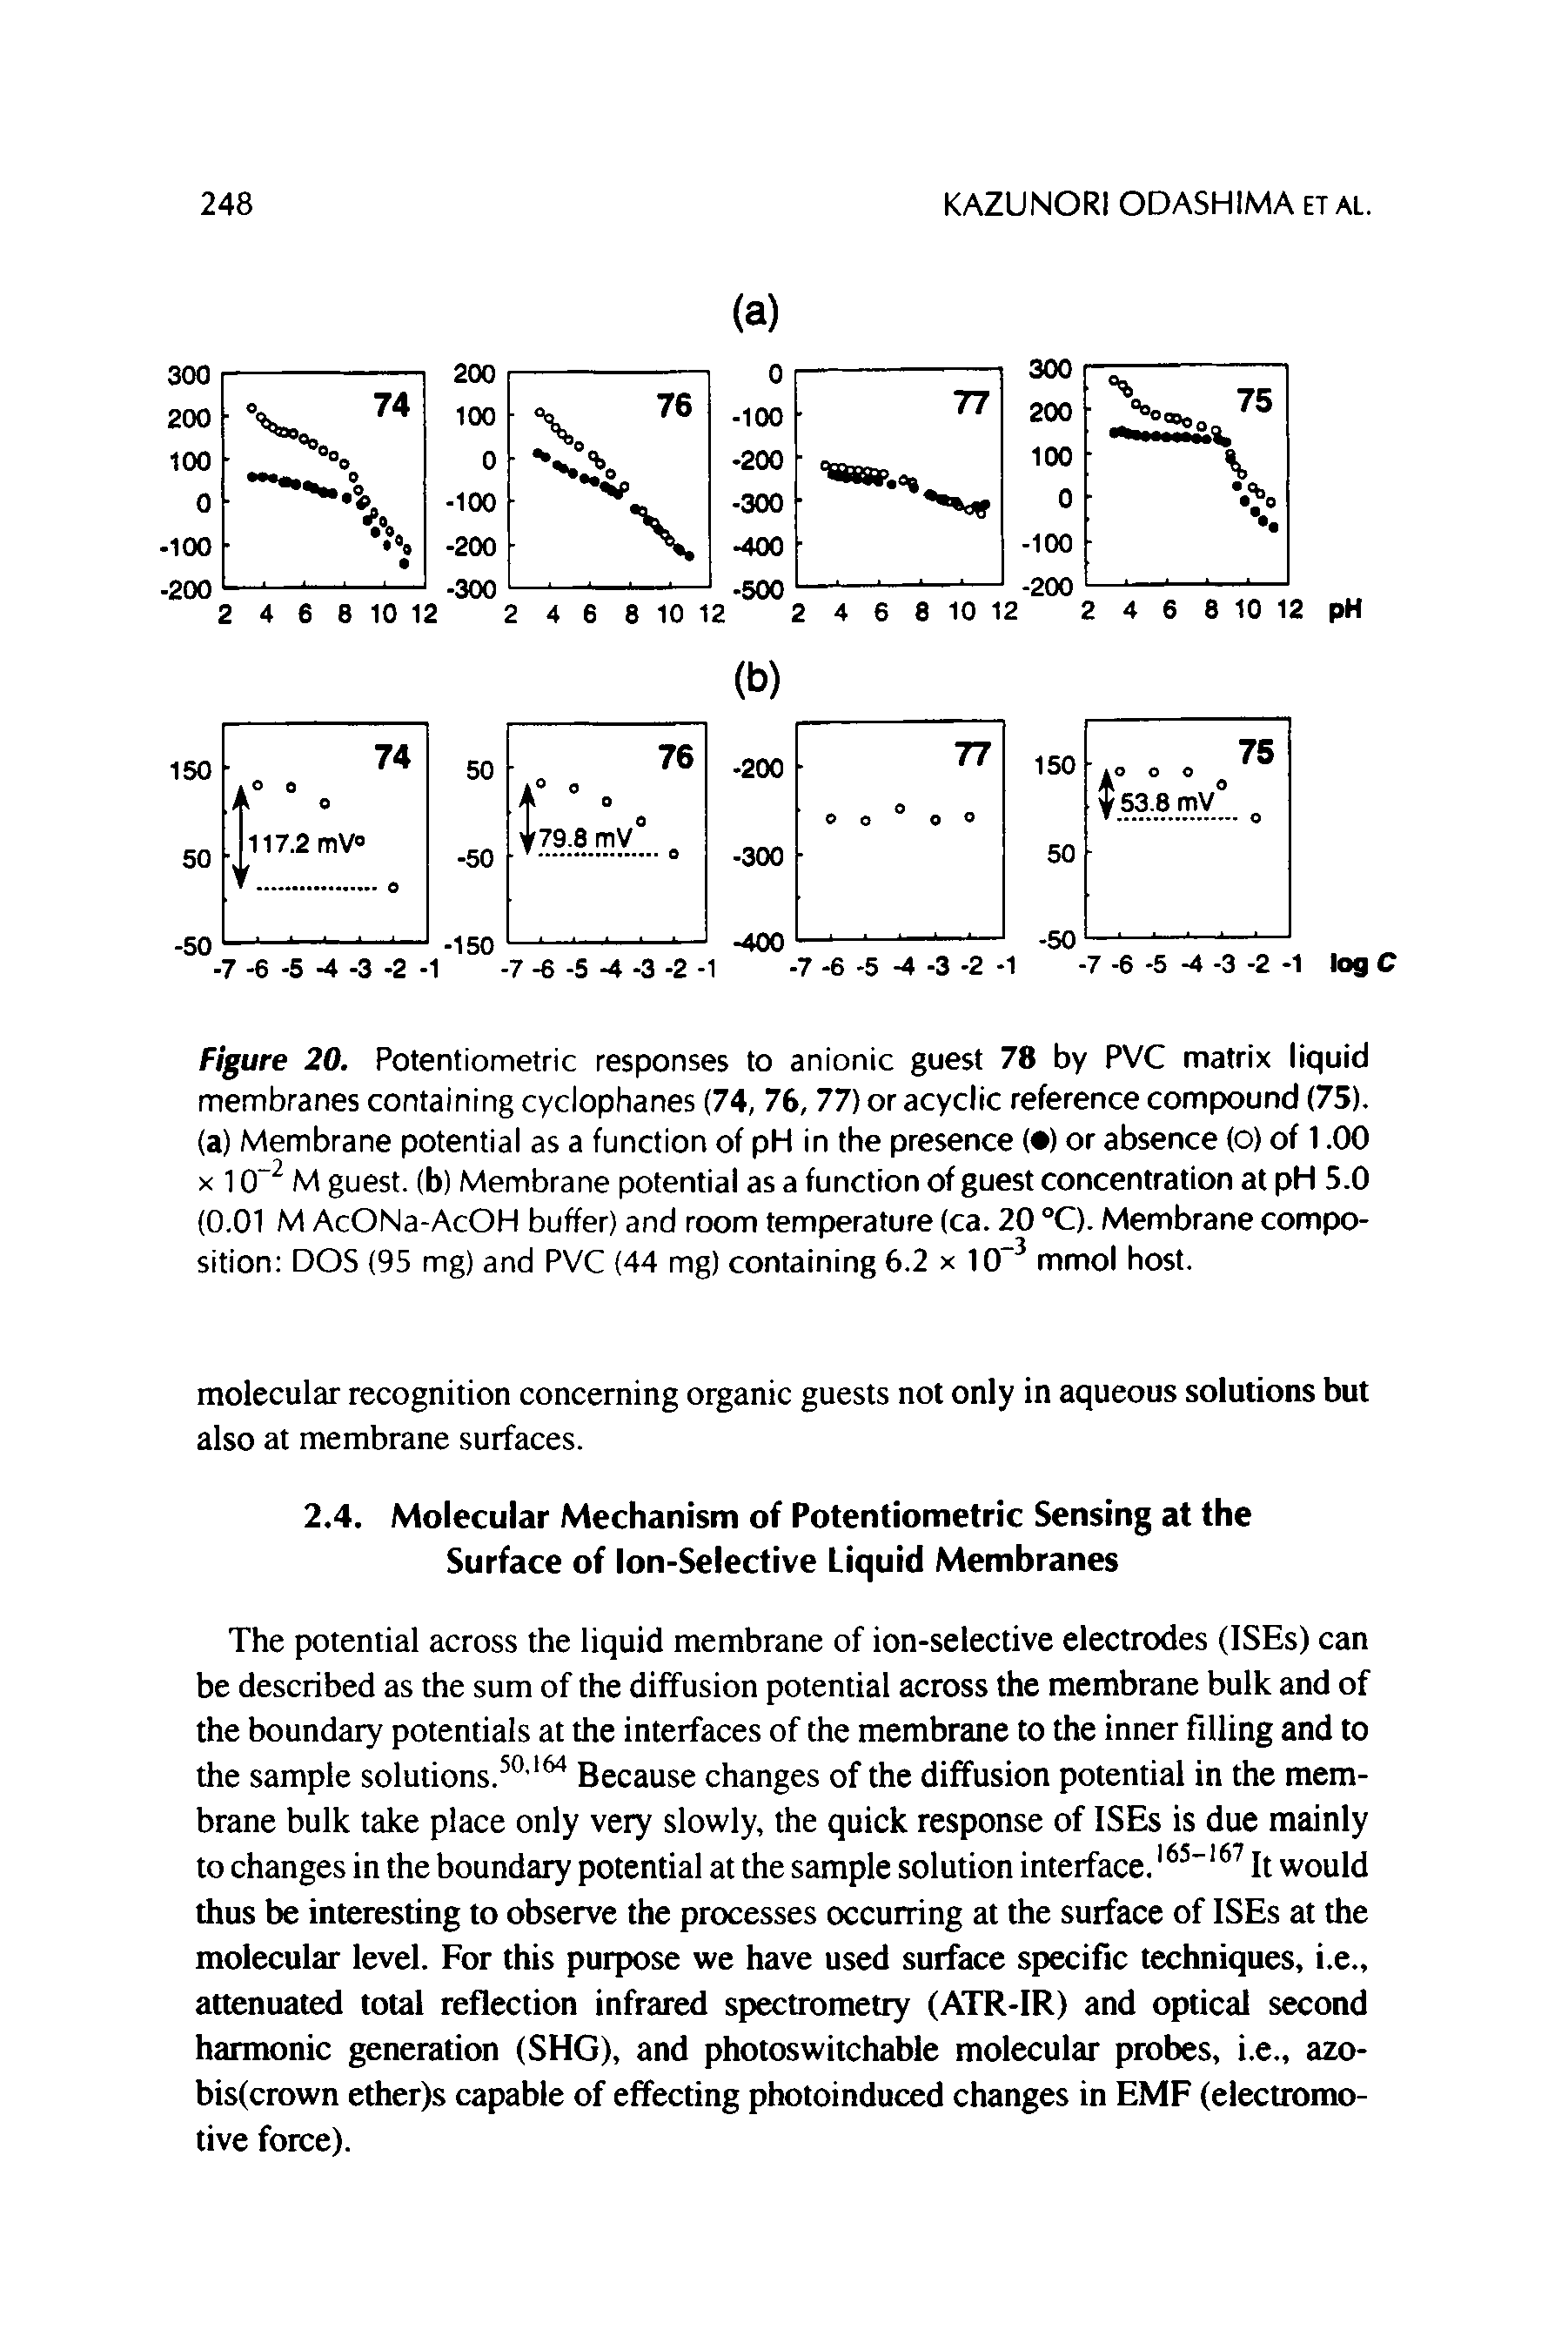 Figure 20. Potentiometric responses to anionic guest 78 by PVC matrix liquid membranes containing cyclophanes (74, 76,77) or acyclic reference compound (75). (a) Membrane potential as a function of pH in the presence ( ) or absence (o) of 1.00 X 10 M guest, (b) Membrane potential as a function of guest concentration at pH 5.0 (0.01 M AcONa-AcOH buffer) and room temperature (ca. 20 °C). Membrane composition DOS (95 mg) and PVC (44 mg) containing 6.2 x 10 mmol host.